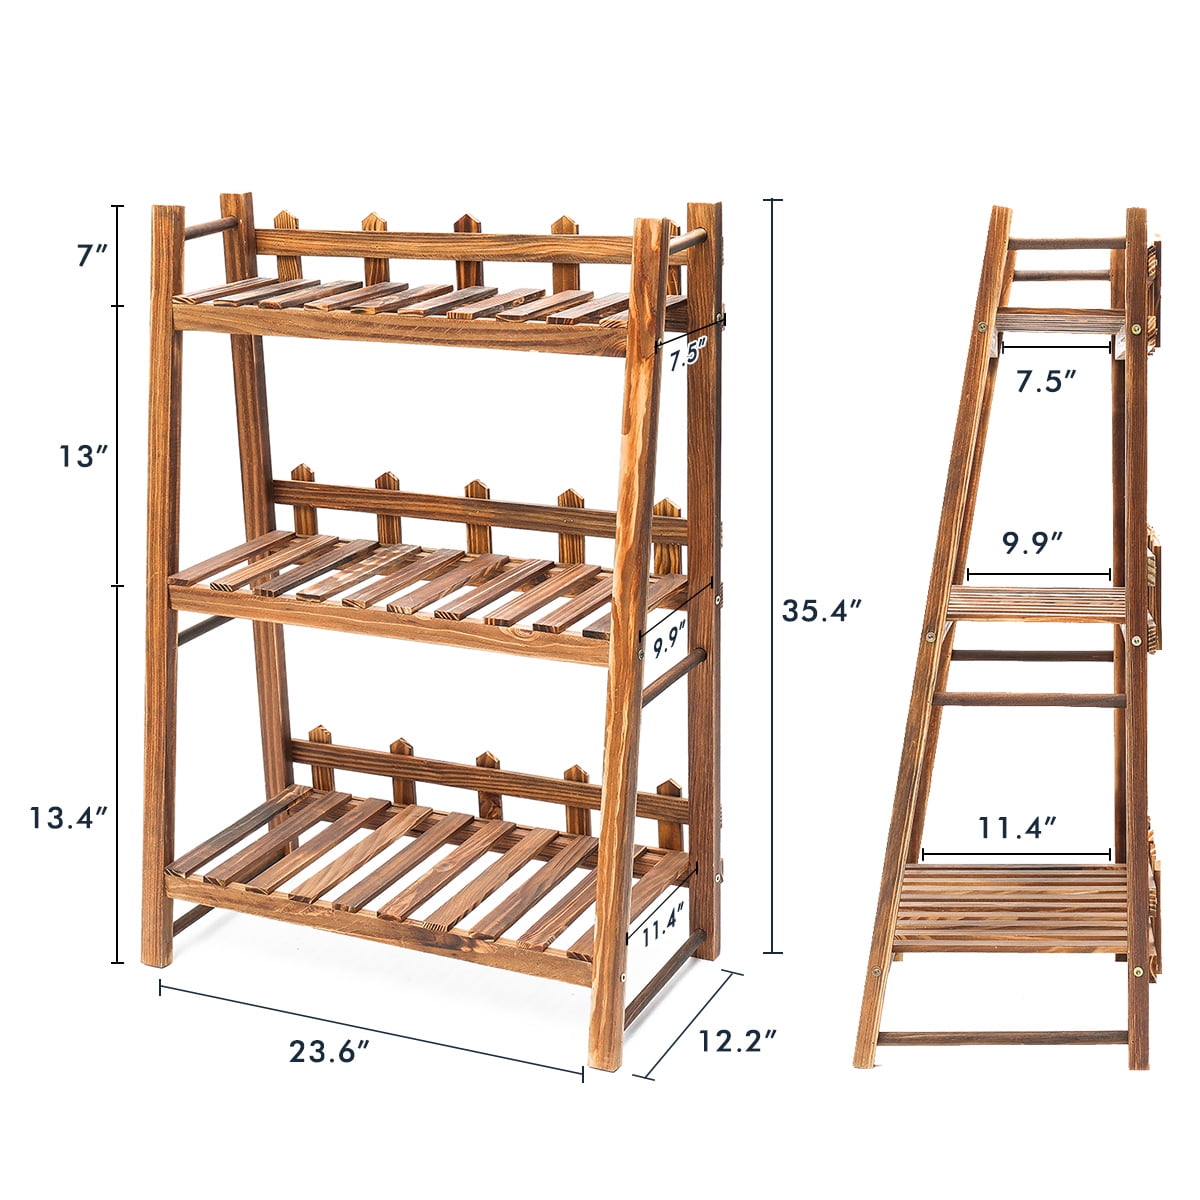 Free Standing Racks XGao 4 Tier 45 Foldable Ladder Shelf Indoor Flower Pot Stands Plant Stand Folding Display Shelves Patio Wood Planters Shelving Unit for Outdoor 